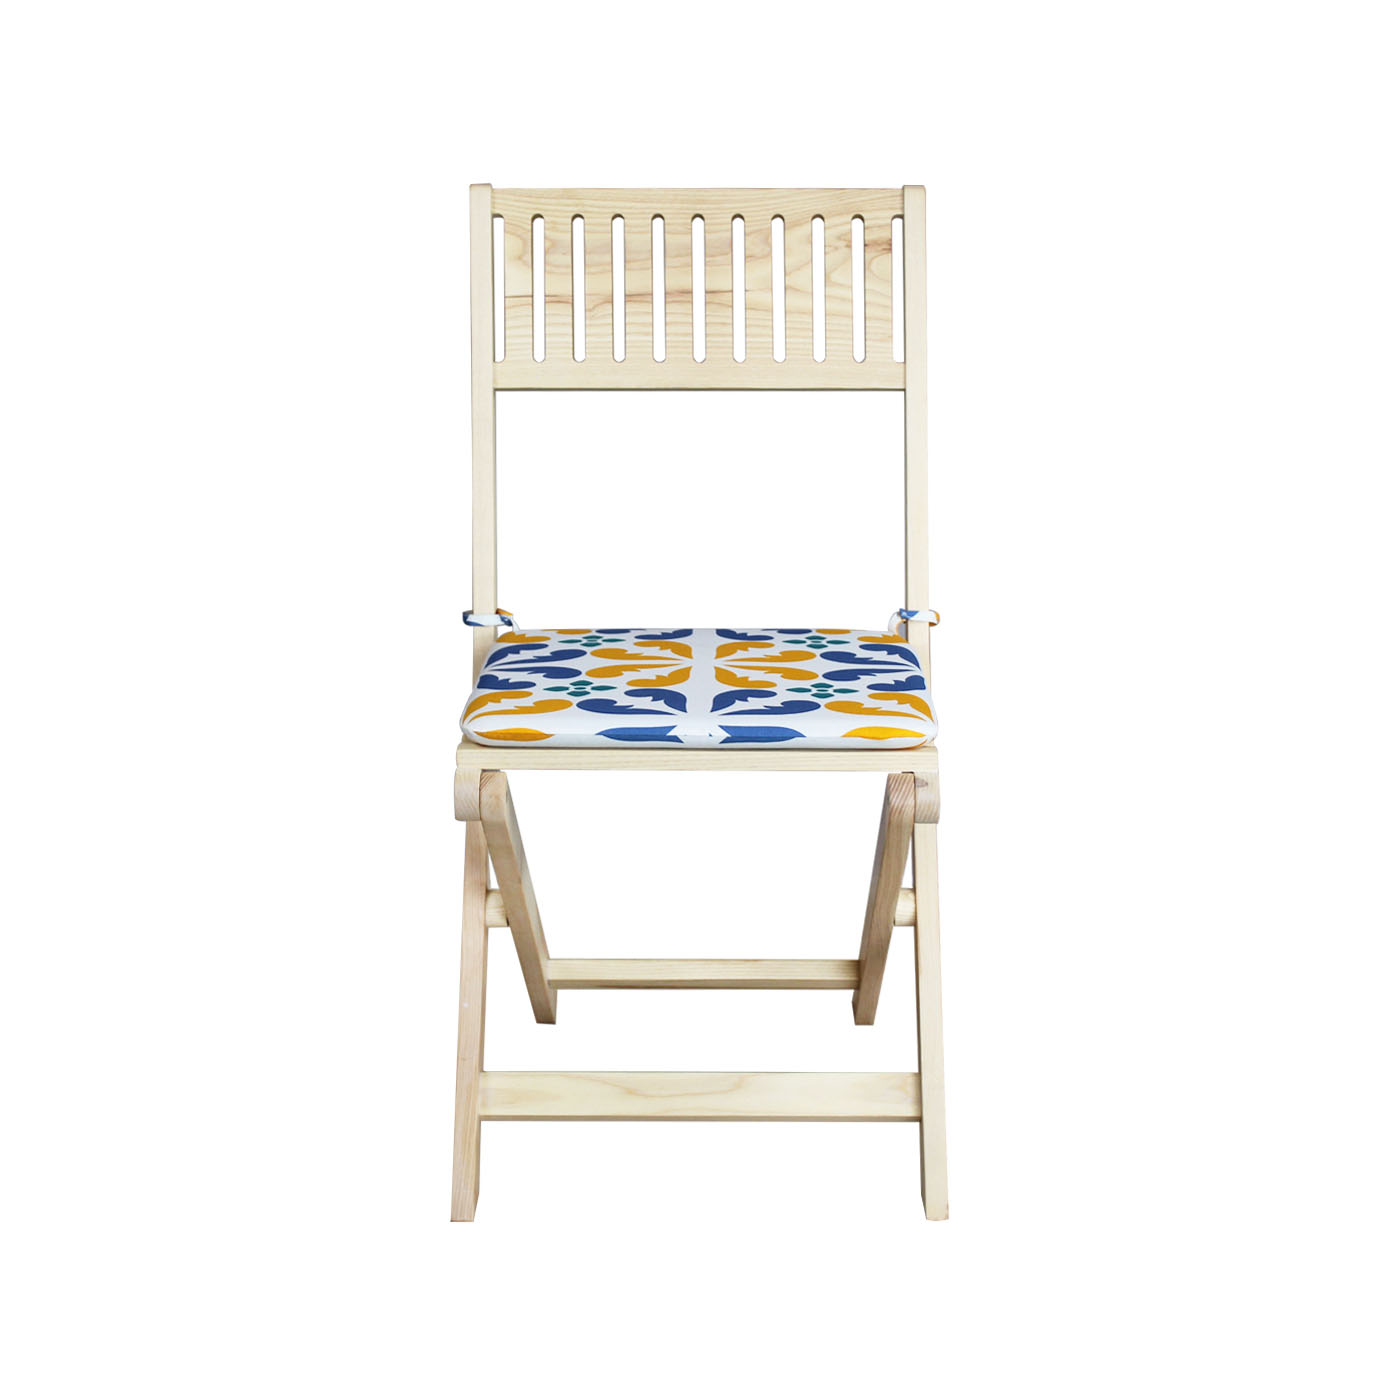 Palermo Blue & Yellow Floral Patterned Light Folding Chair